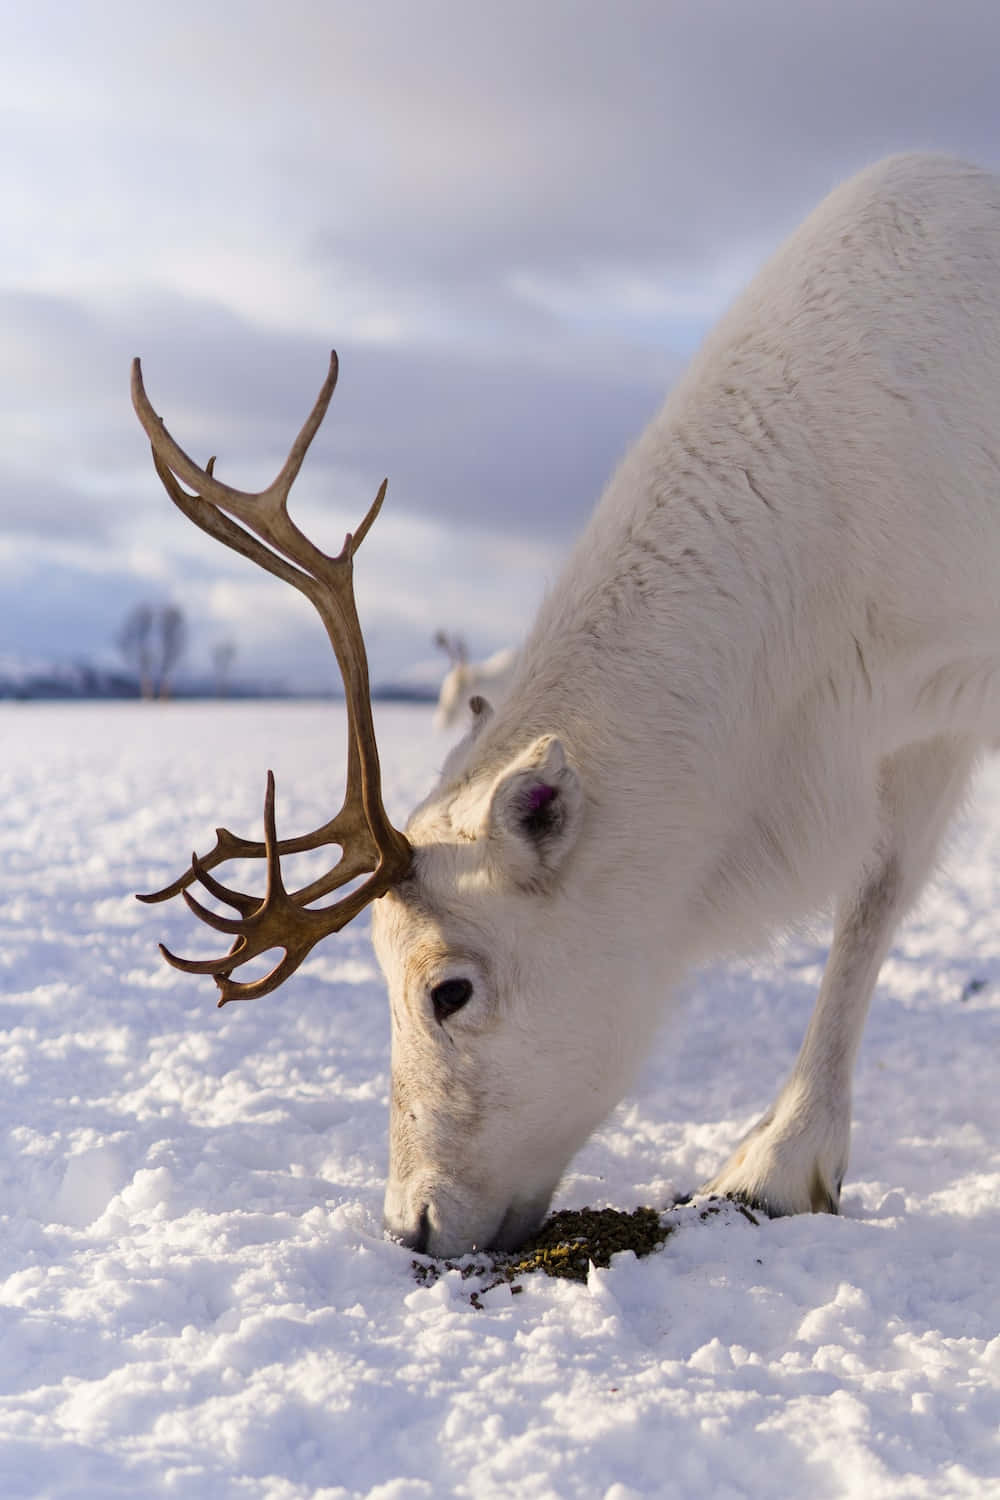 Majestic Reindeer in its Natural Environment